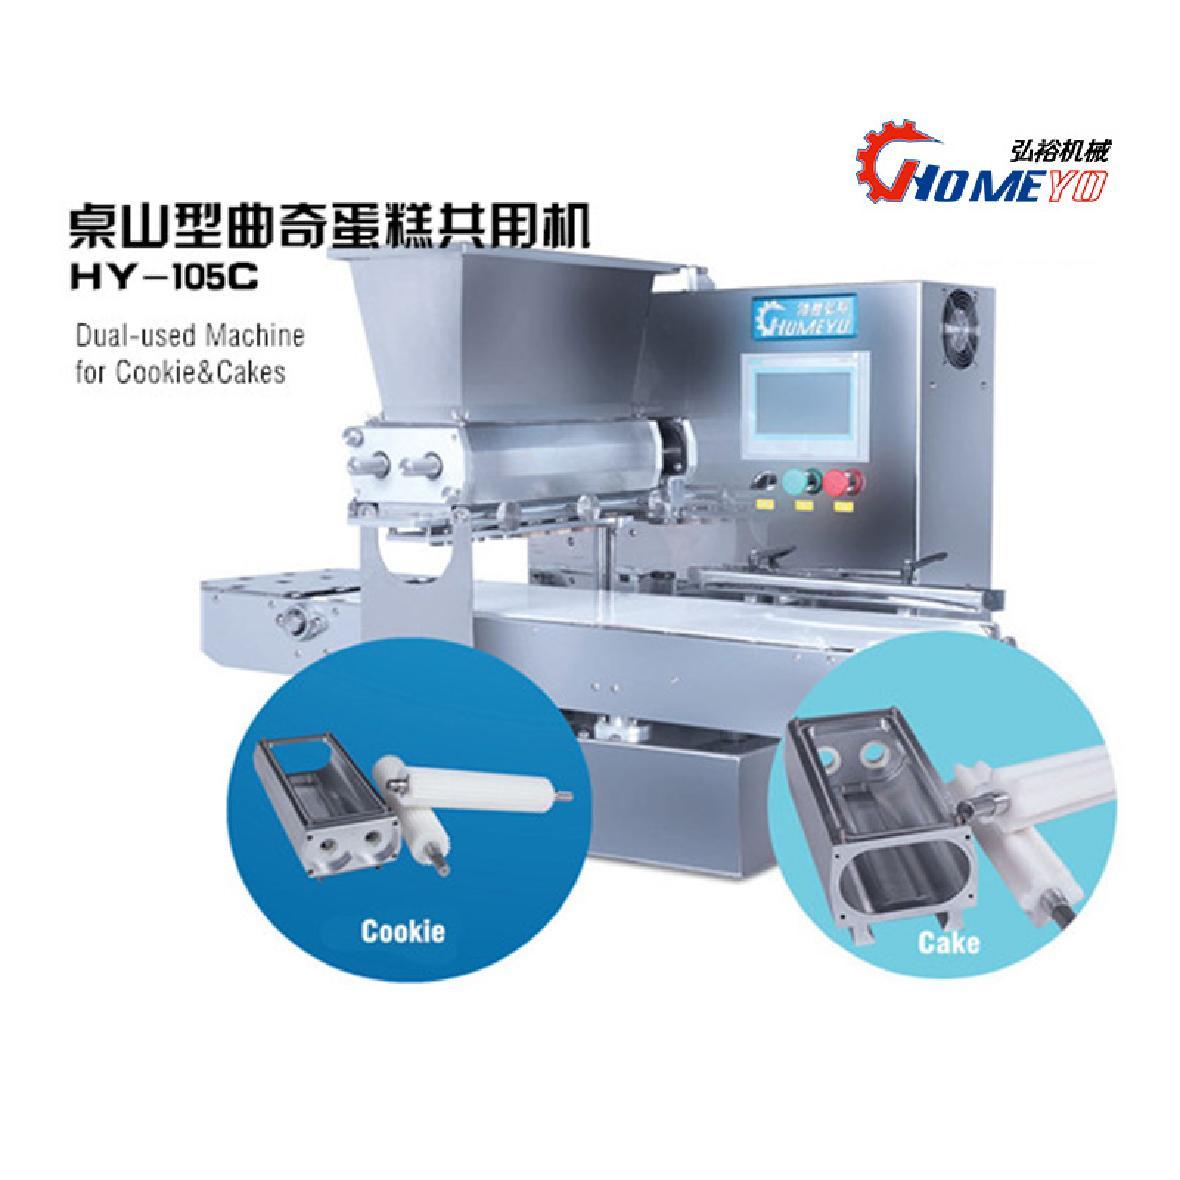 Desk-top Dual-used Machine for Cookies & Cakes